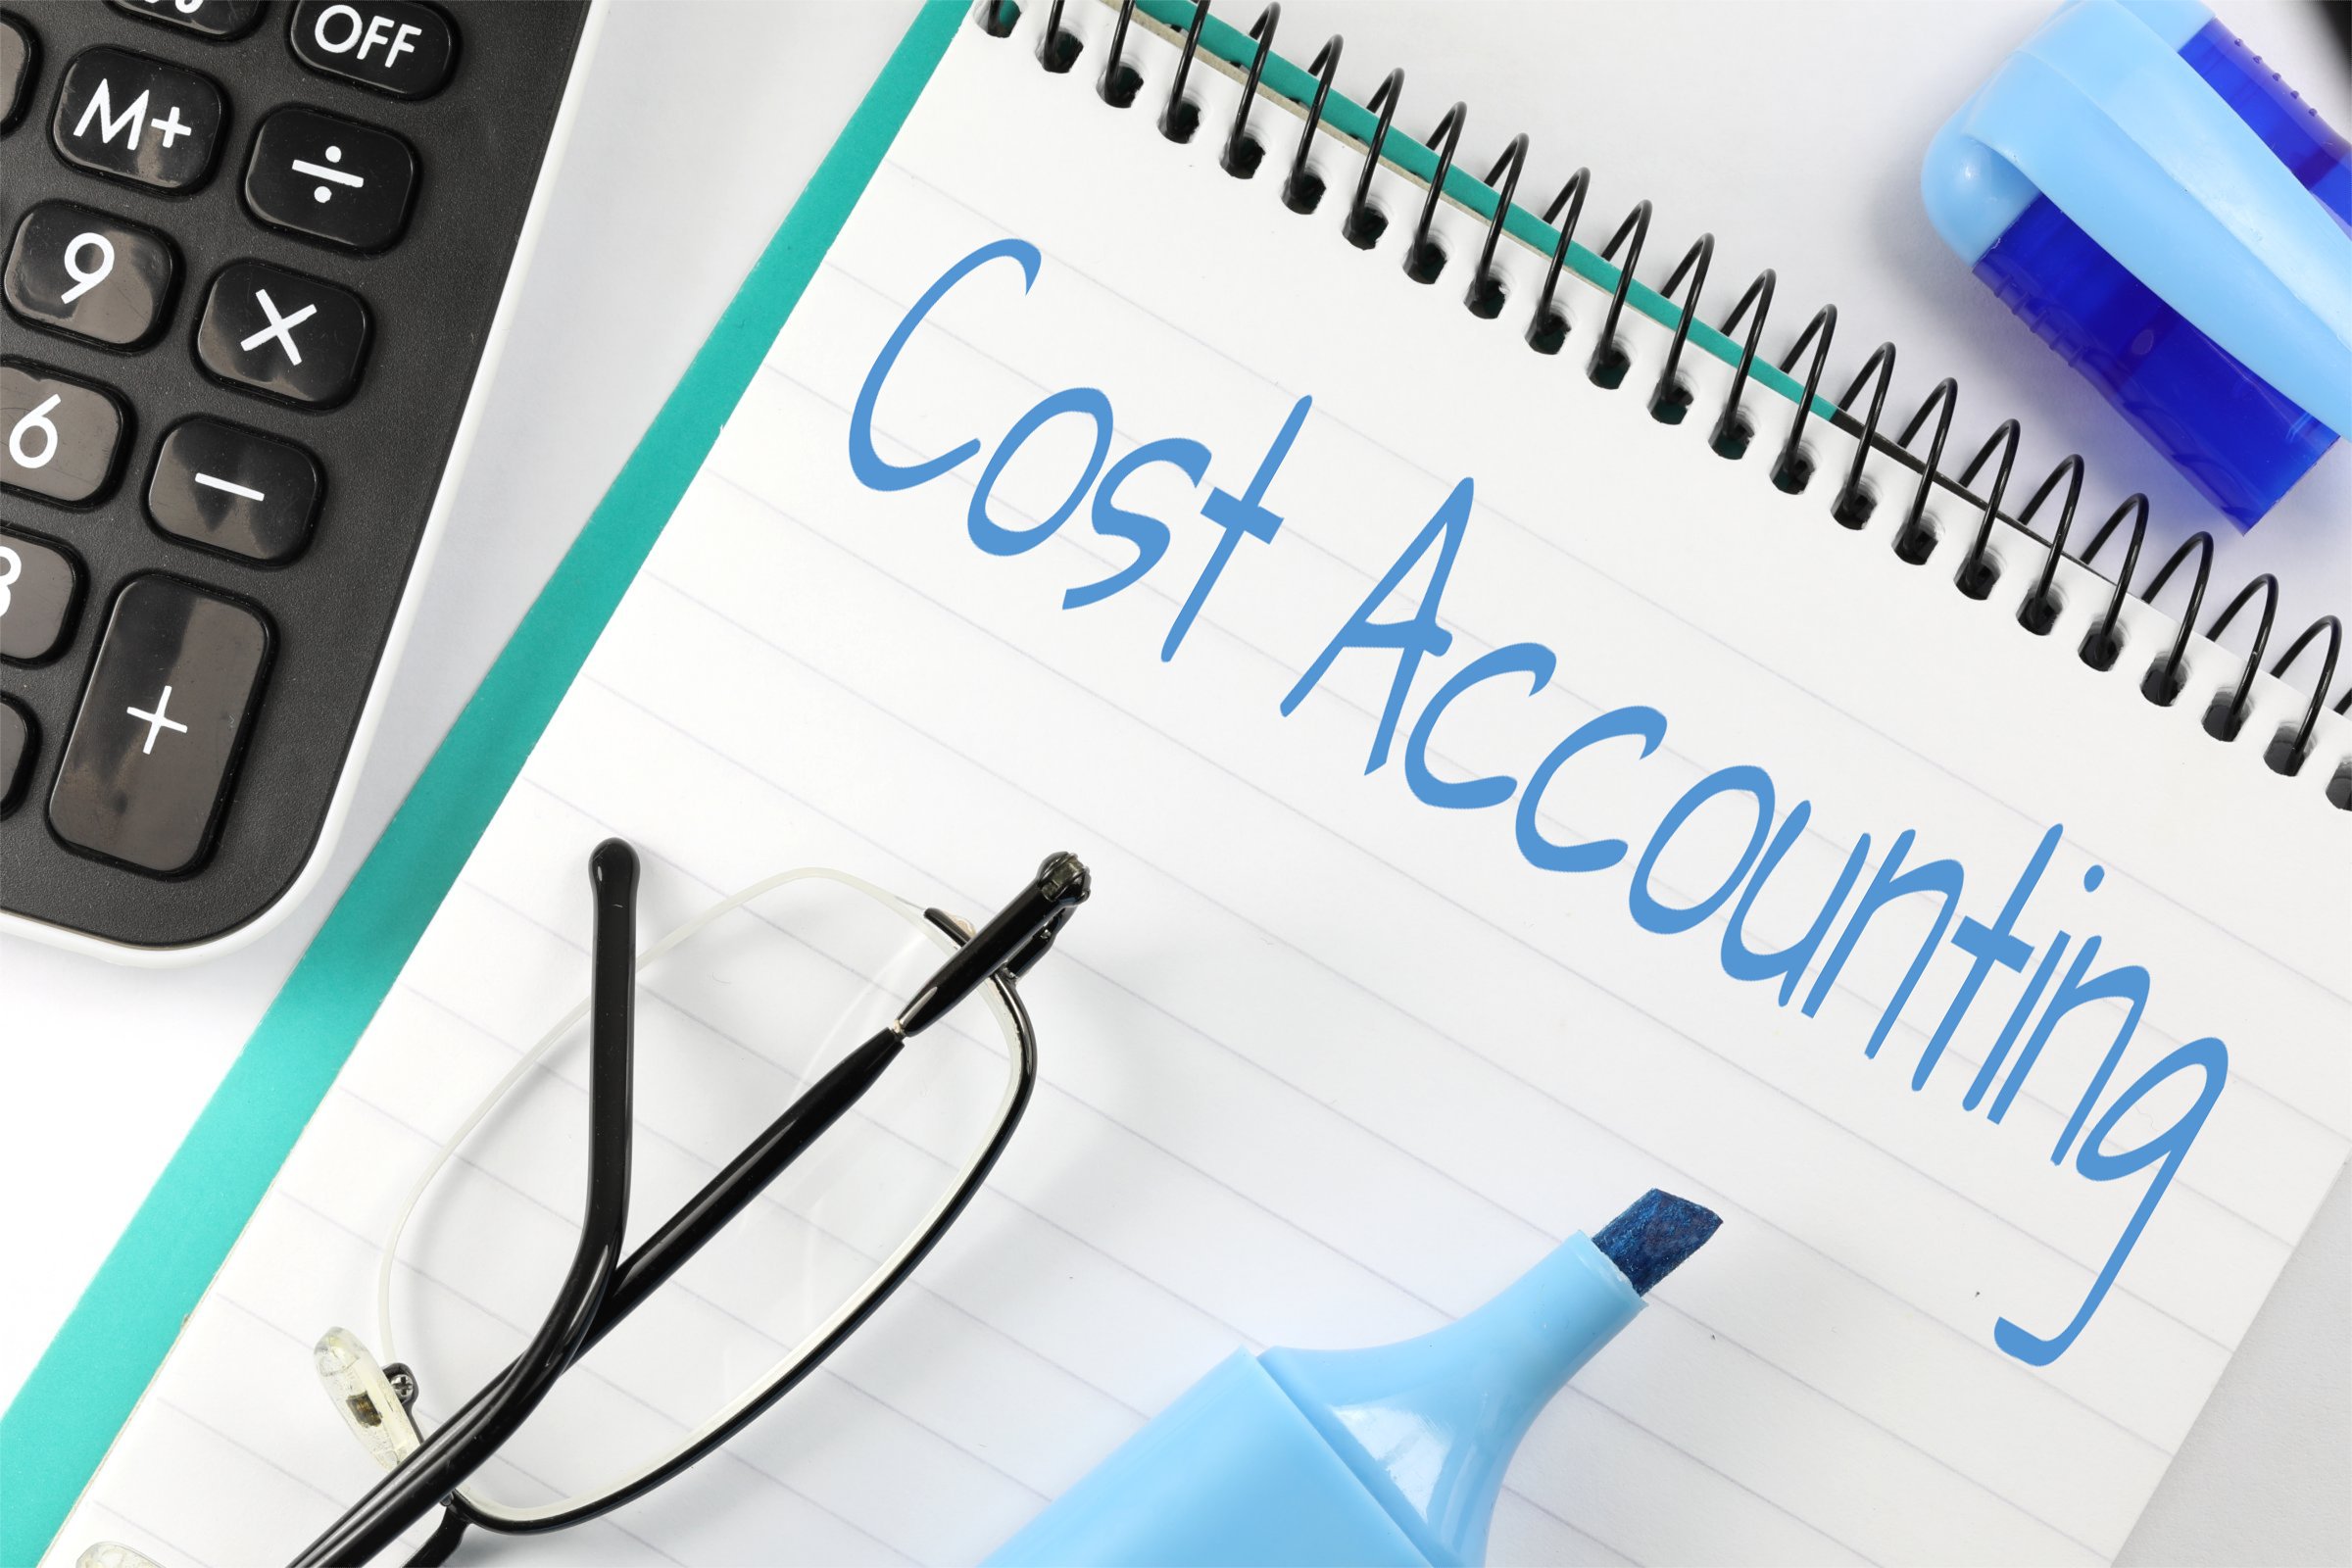 Free of Charge Creative Commons cost accounting Image